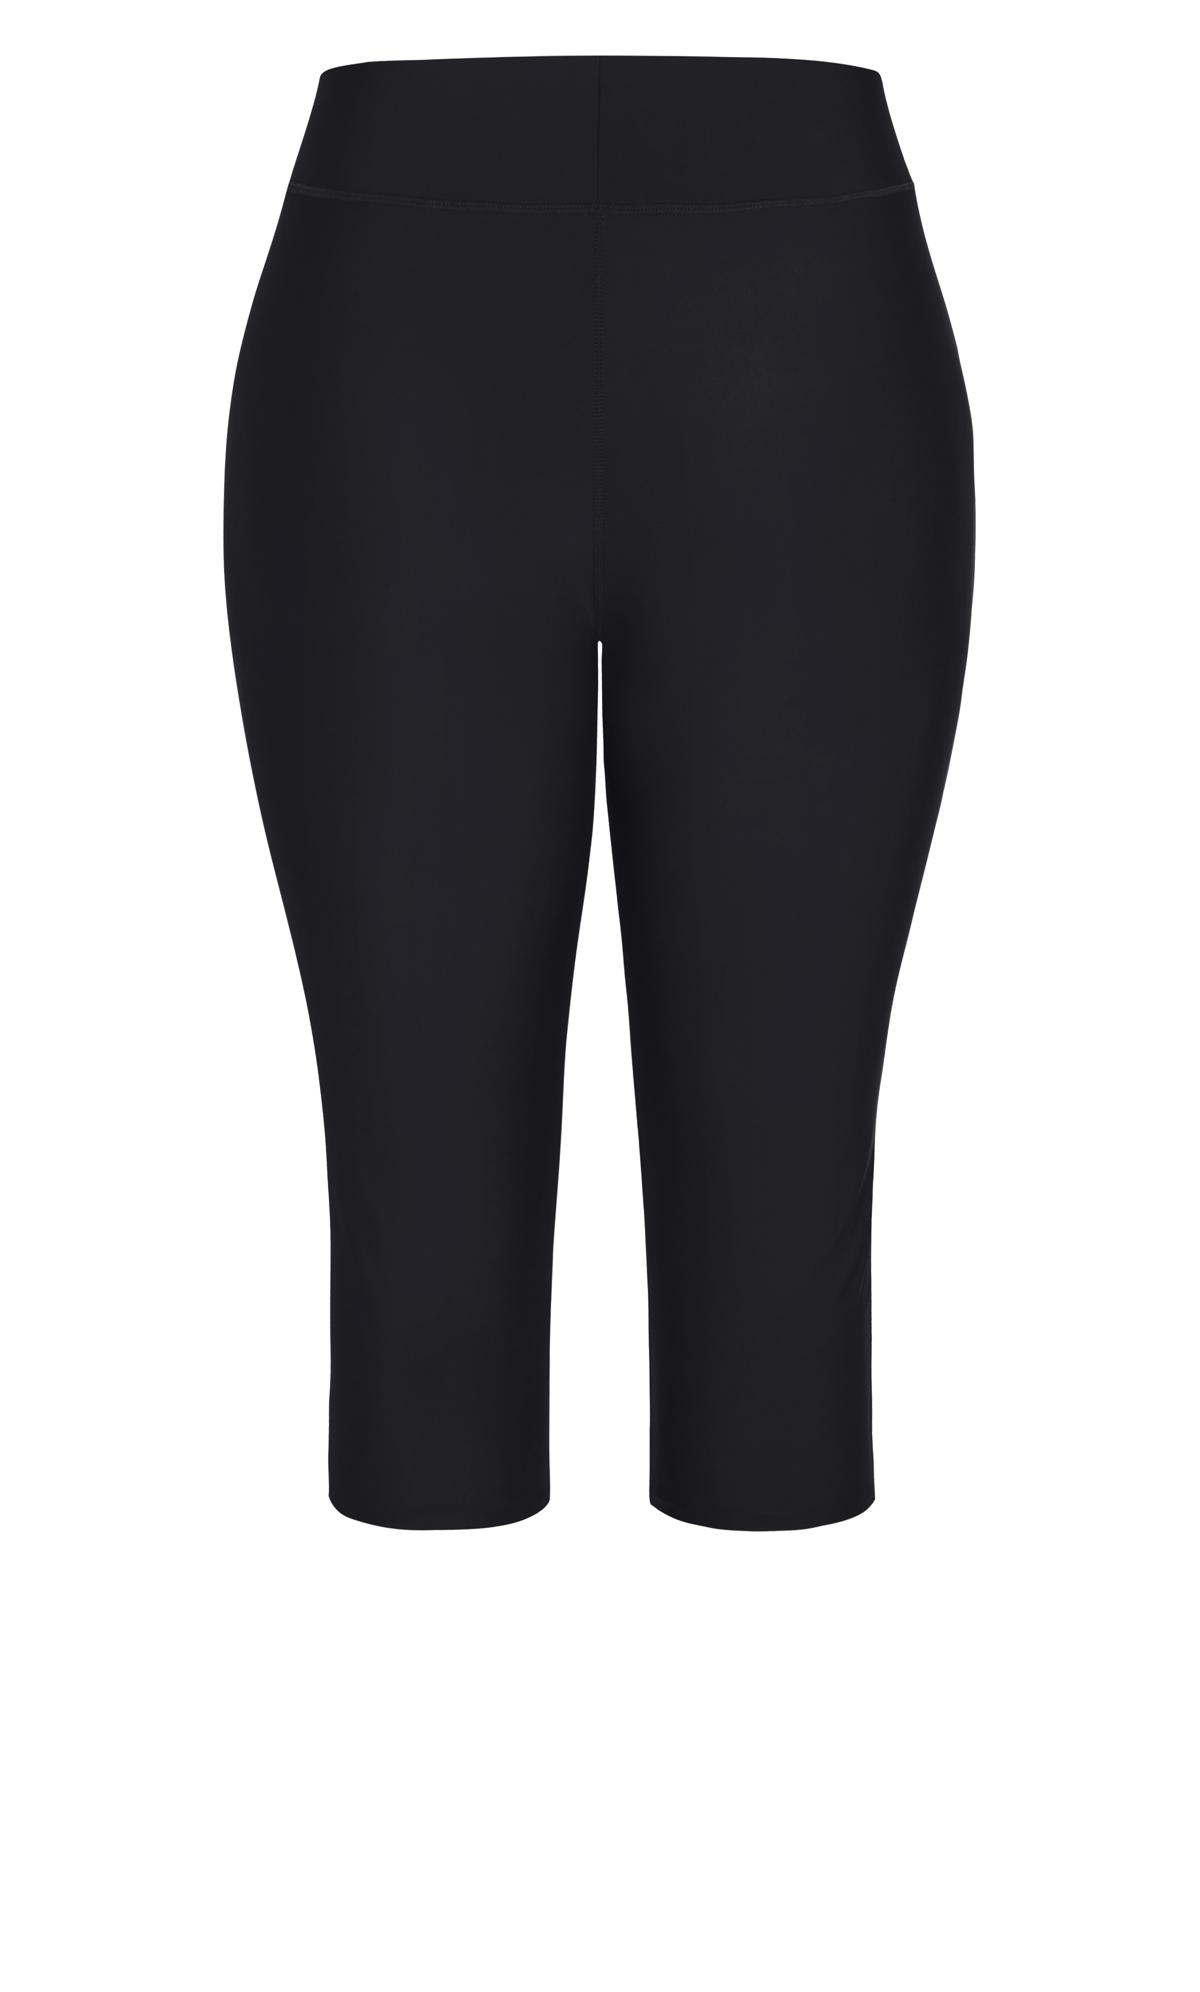 Hex Contour Black Shaping Form Fitted High Waisted Activewear Gym Womens  Legging